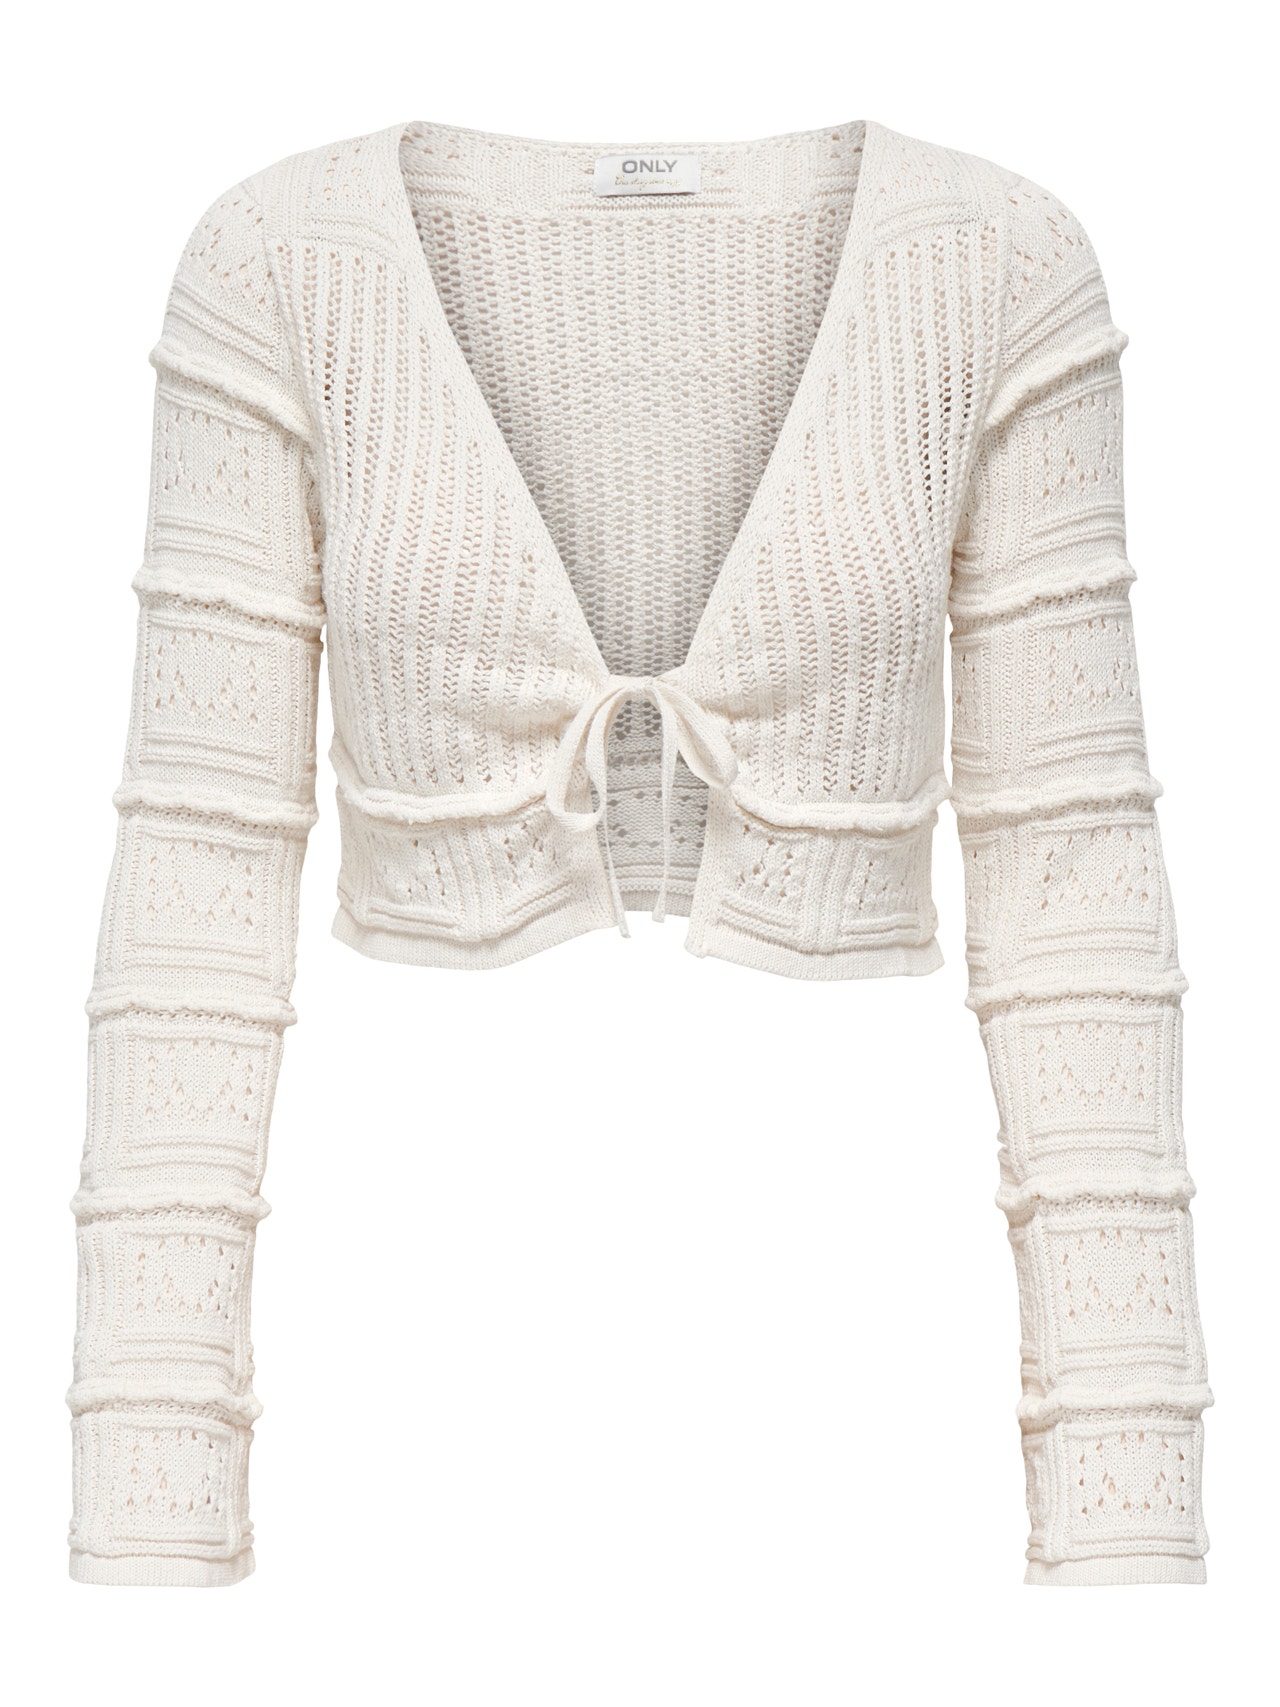 ONLY Knitted cardigan with tie string -Cloud Dancer - 15338478